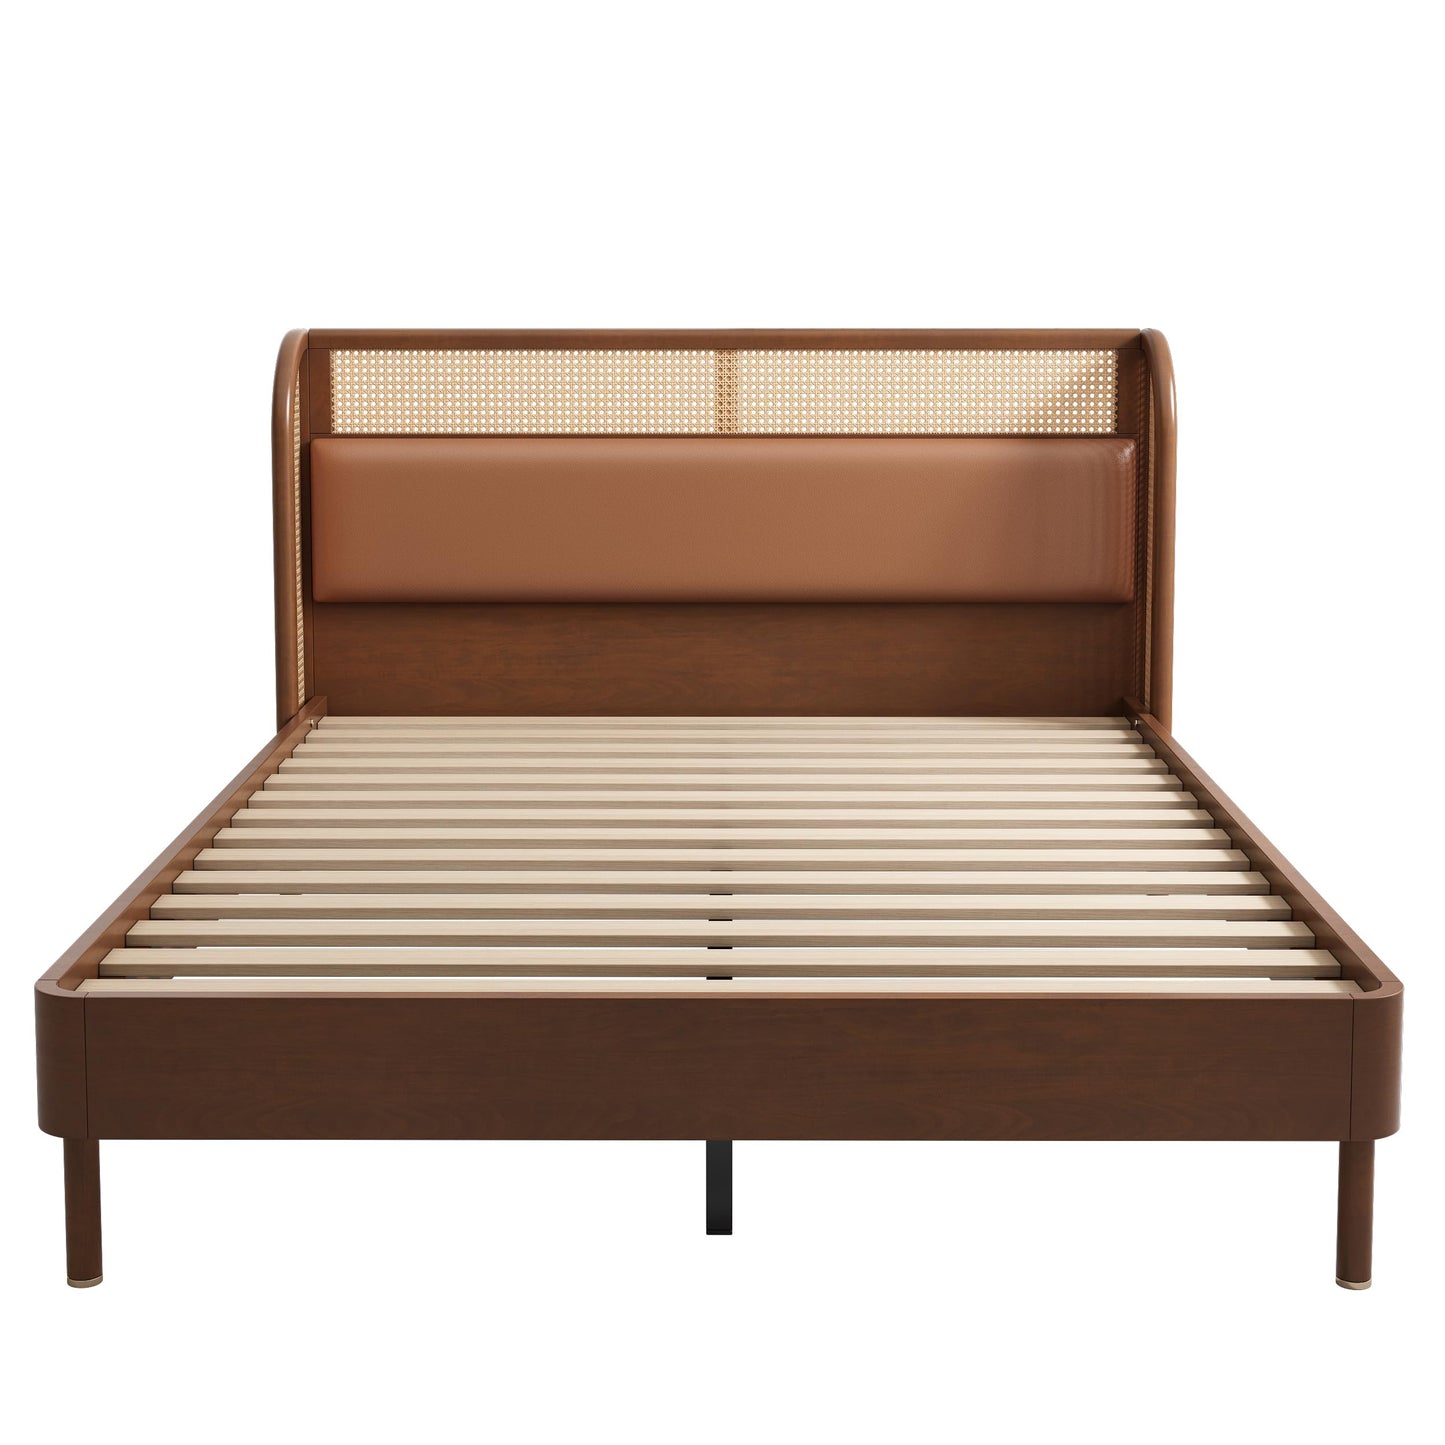 SOFTSEA Queen Size Bed Frame with Upholstered Headboard, Rattan Wingback Platform Bed, Faux Leather Headboard, Wood Slat Support, No Box Spring